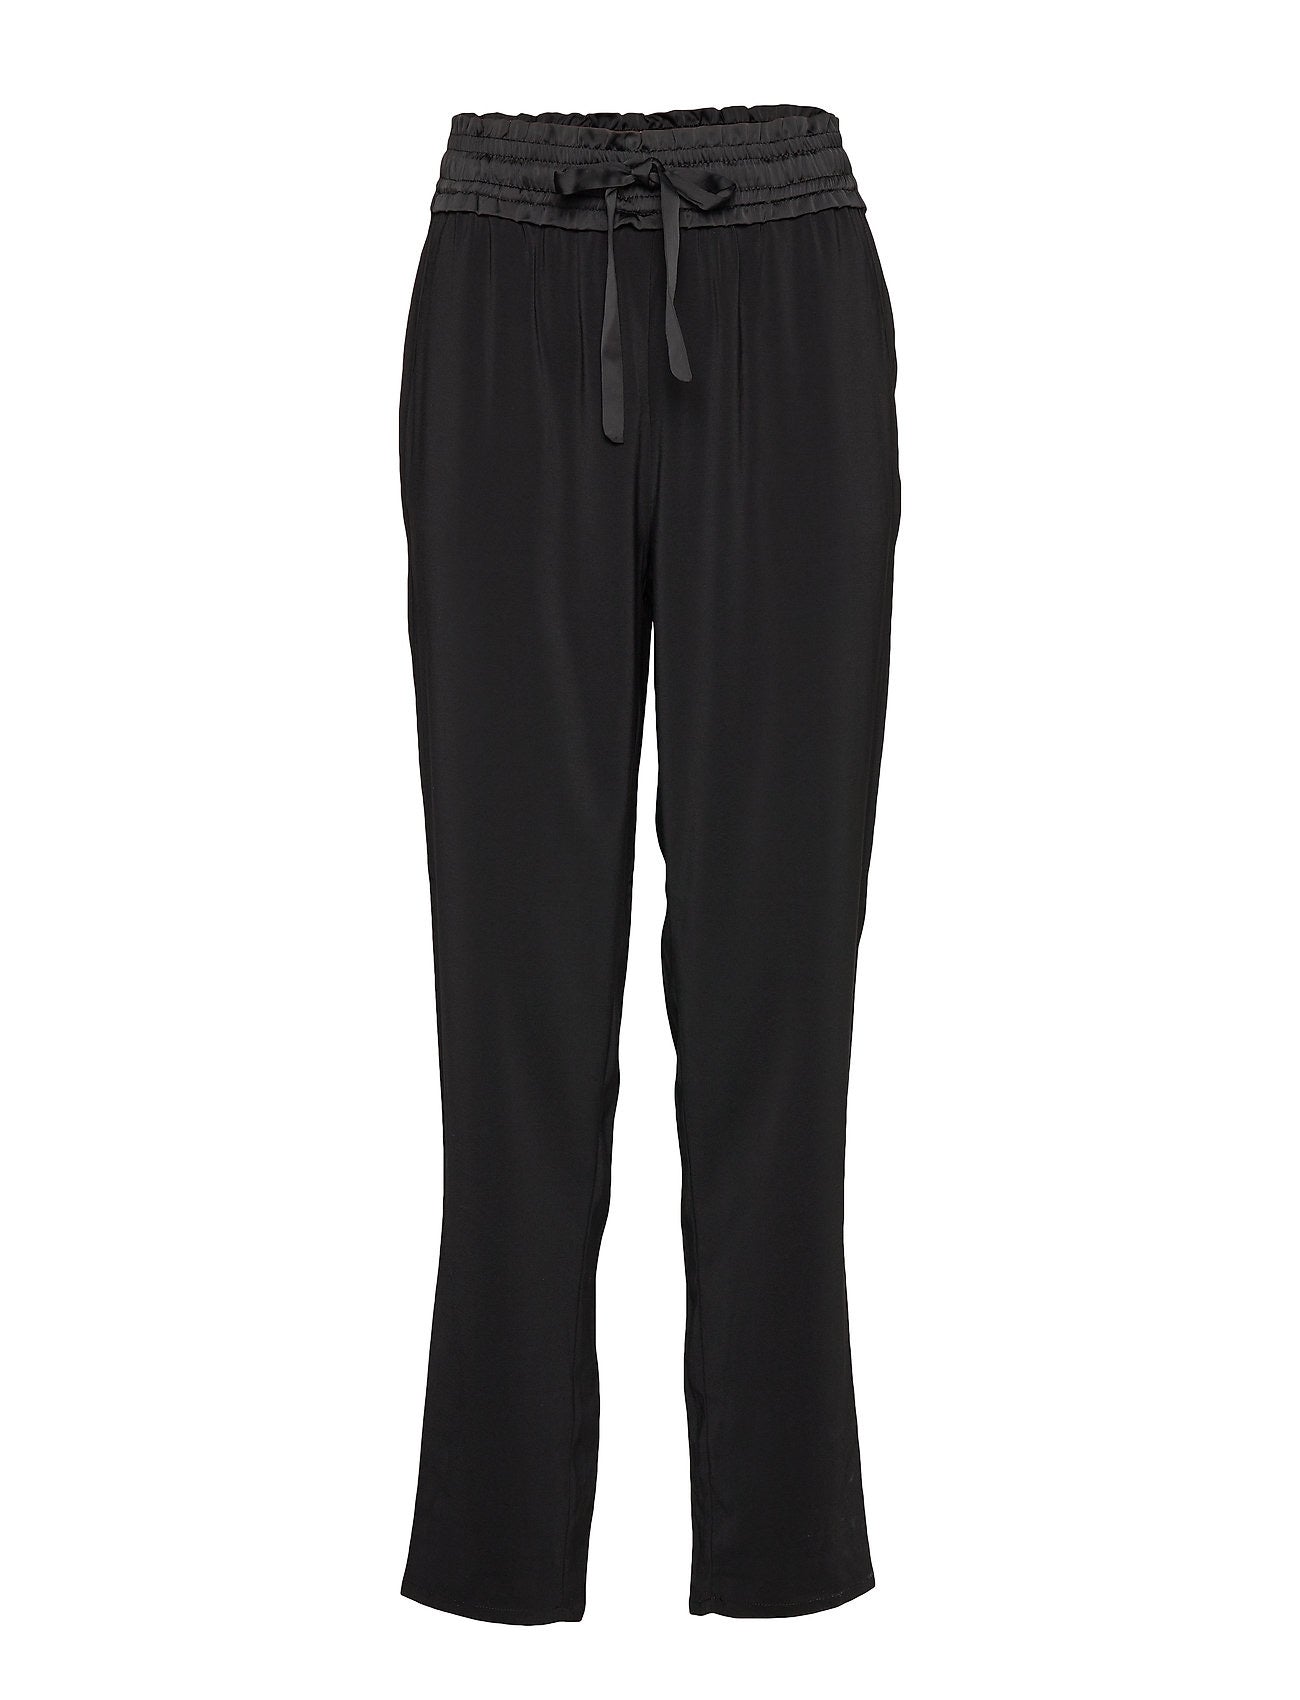 Black Woven Trousers